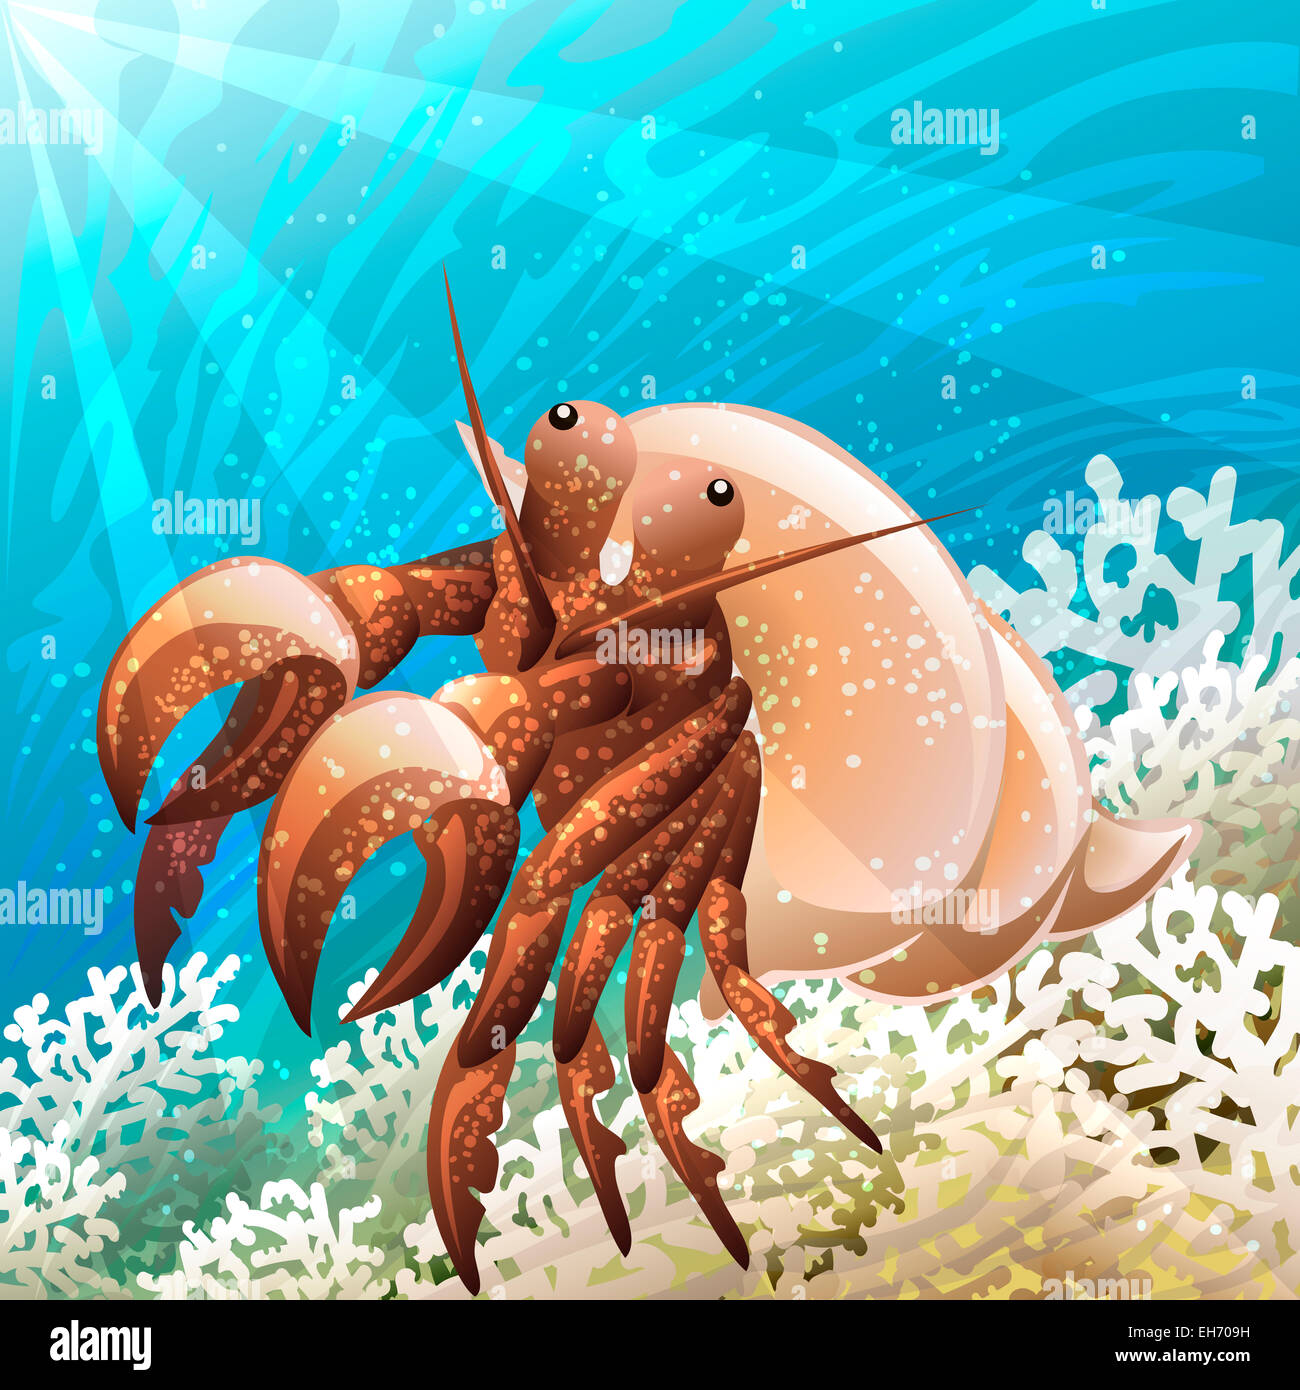 Illustration with hermit crab in coral reef against seabed background drawn in cartoon style Stock Photo